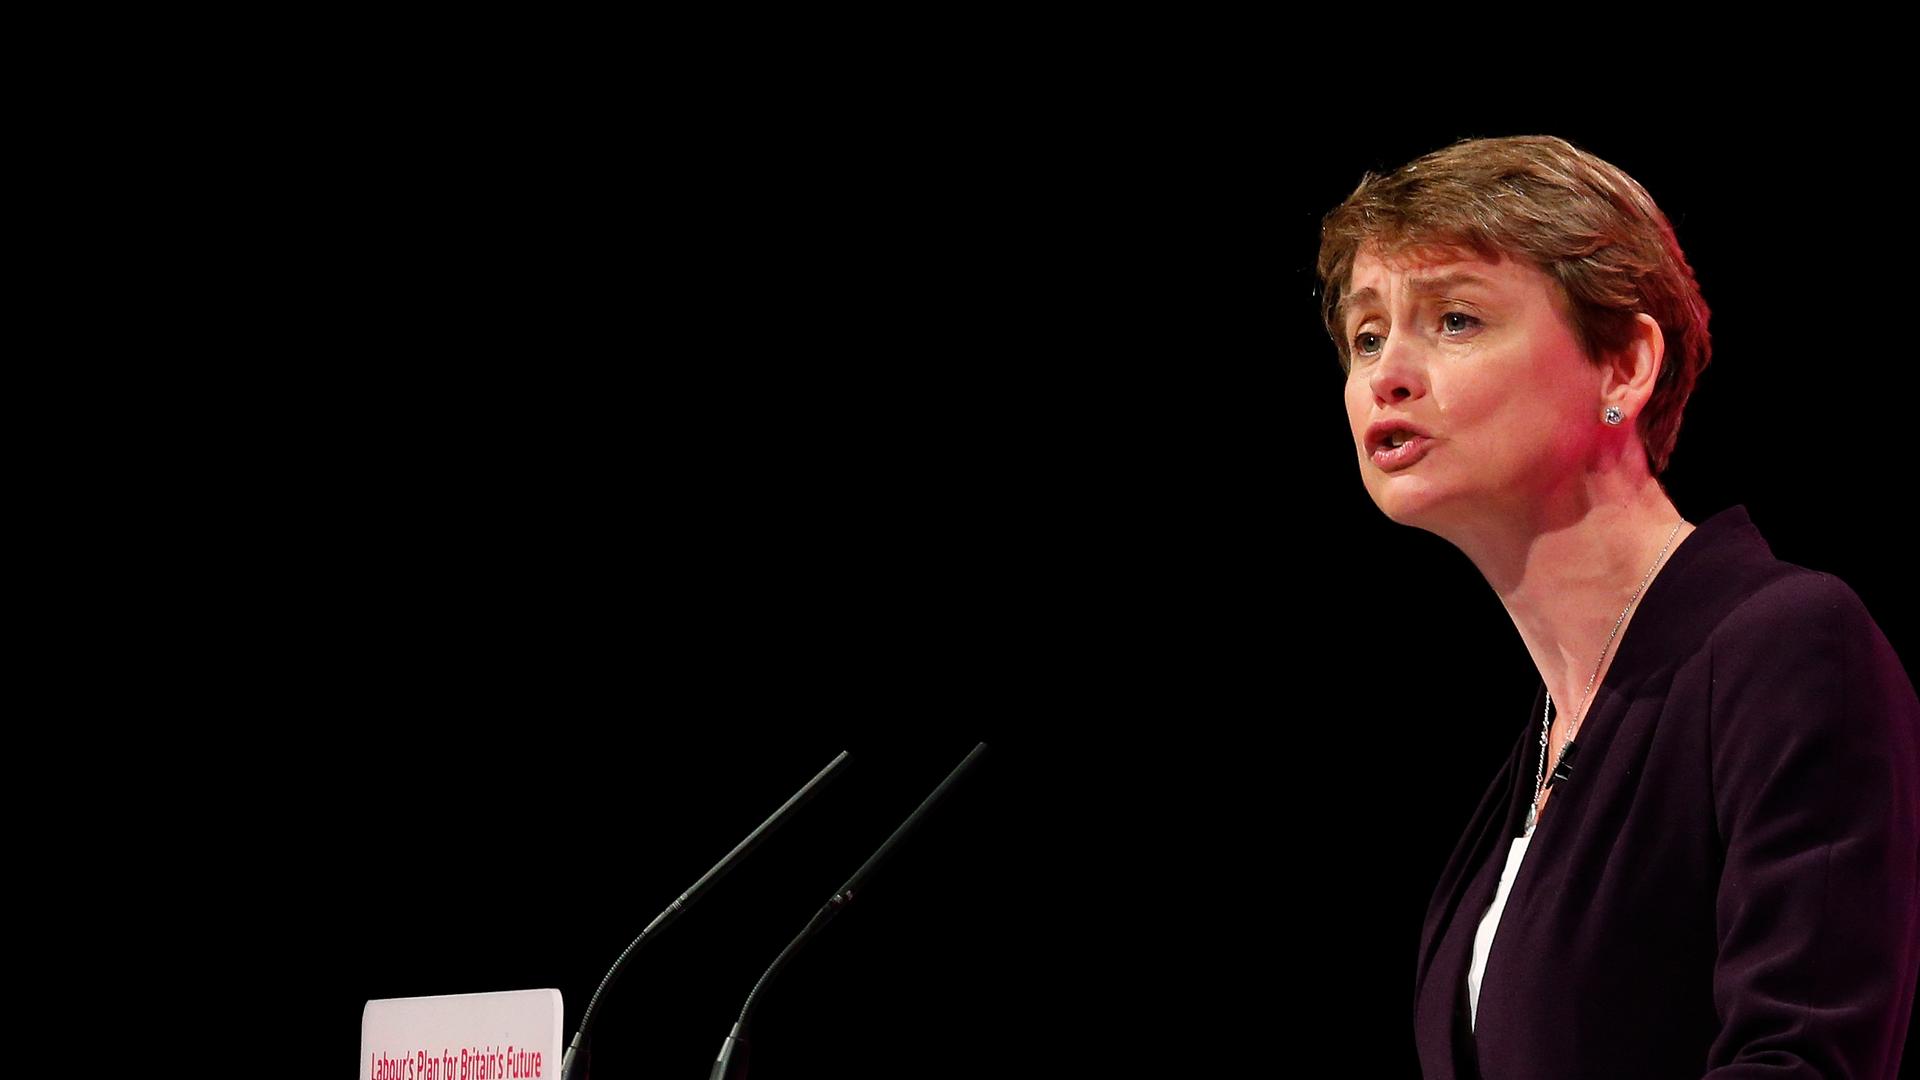 British politician Yvette Cooper speaks at a conference in September, 2014.